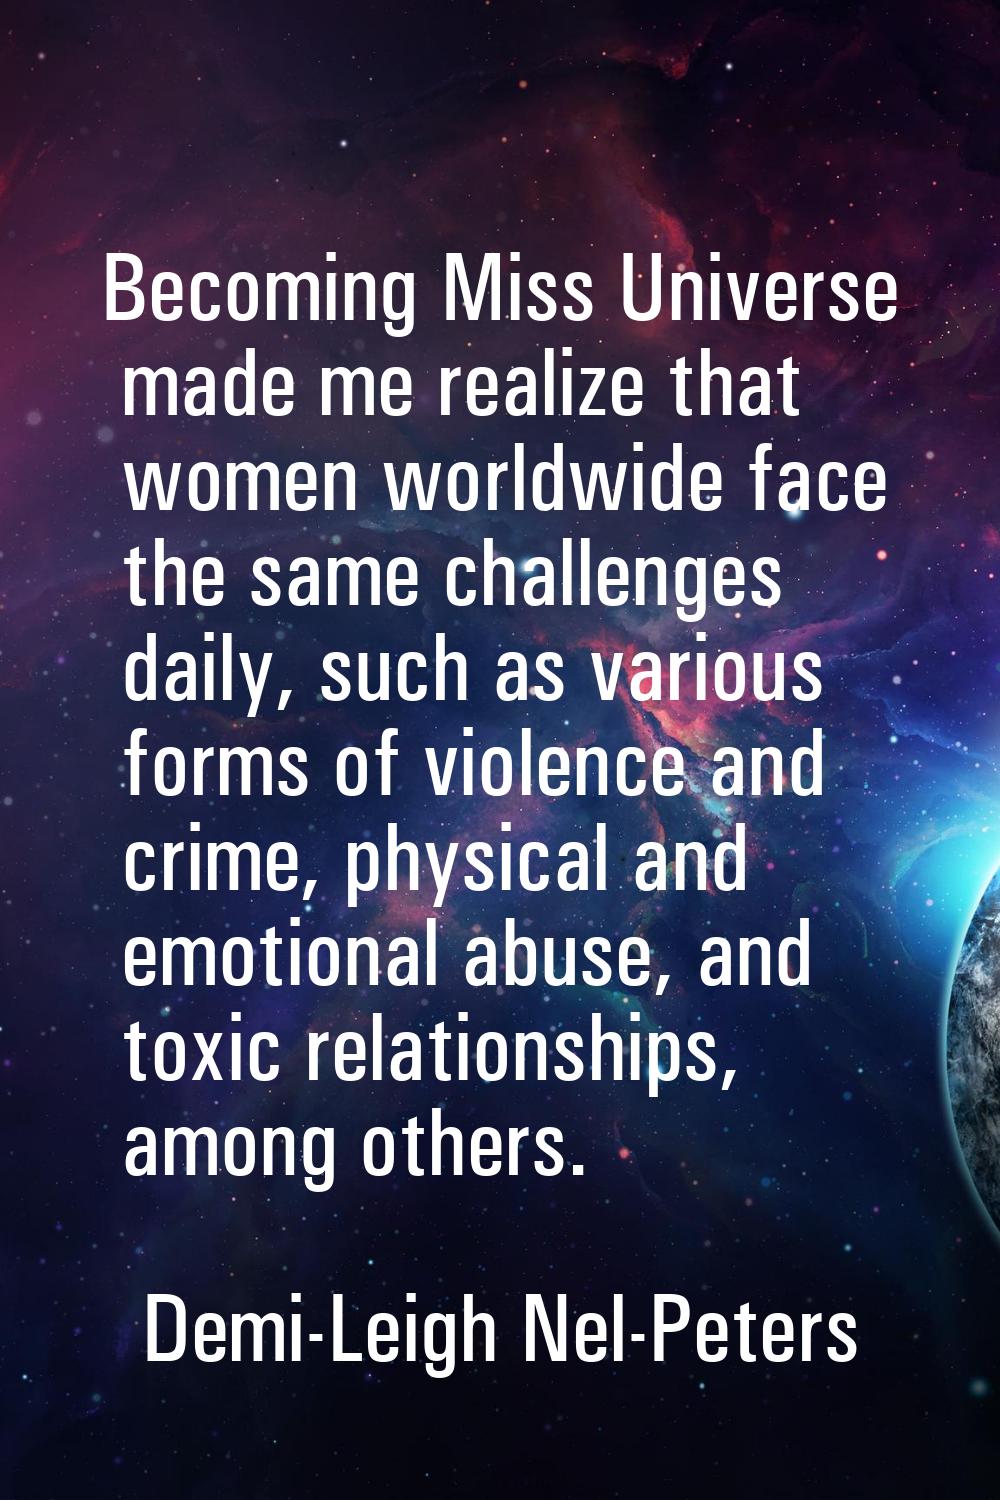 Becoming Miss Universe made me realize that women worldwide face the same challenges daily, such as